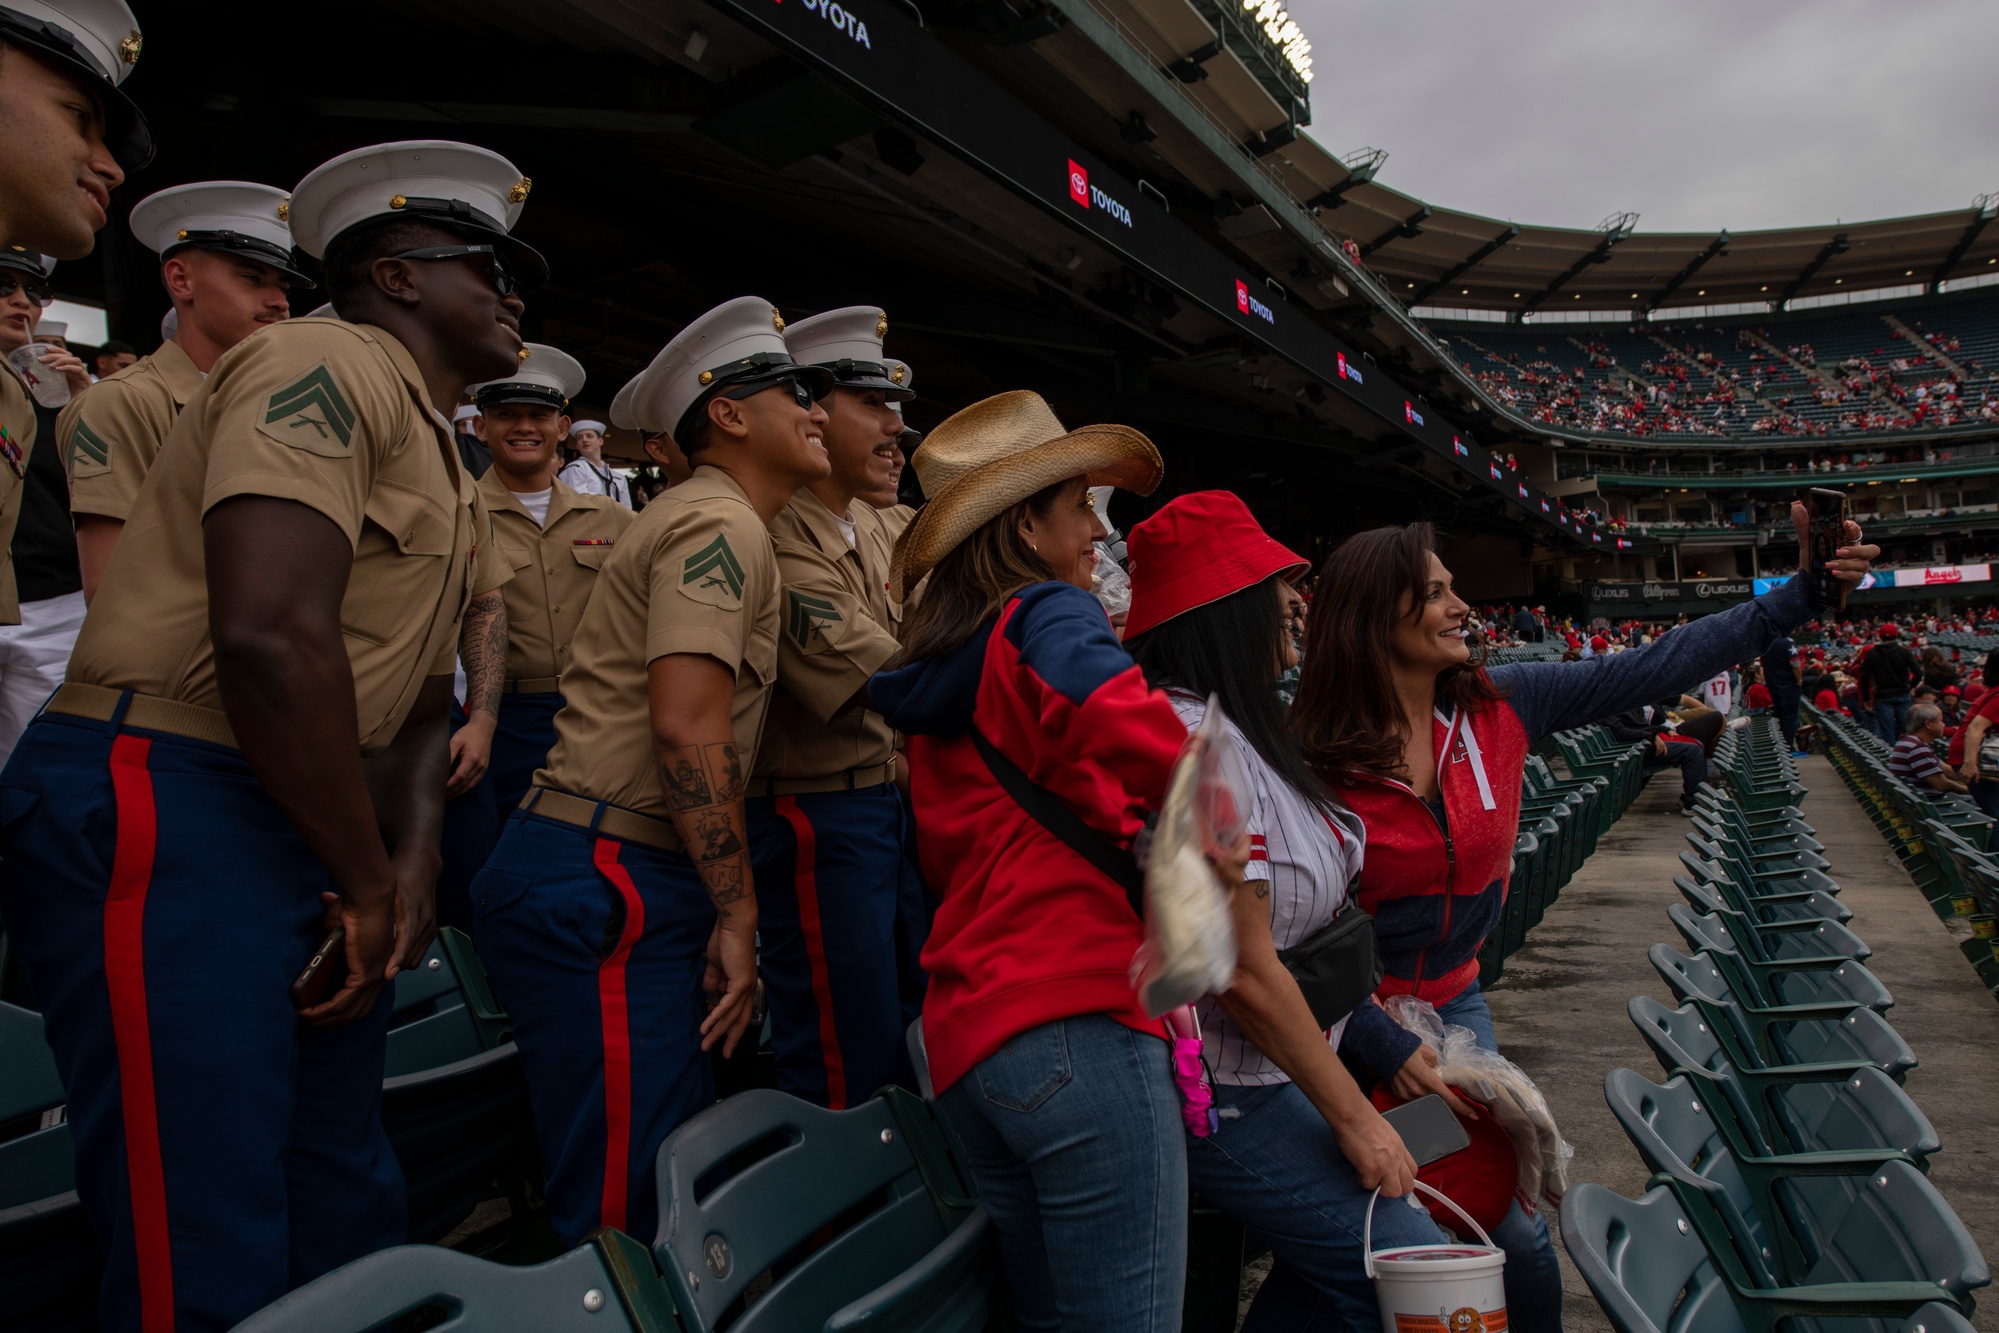 DVIDS - Images - Sailors and Marine attend a Anaheim Angels game